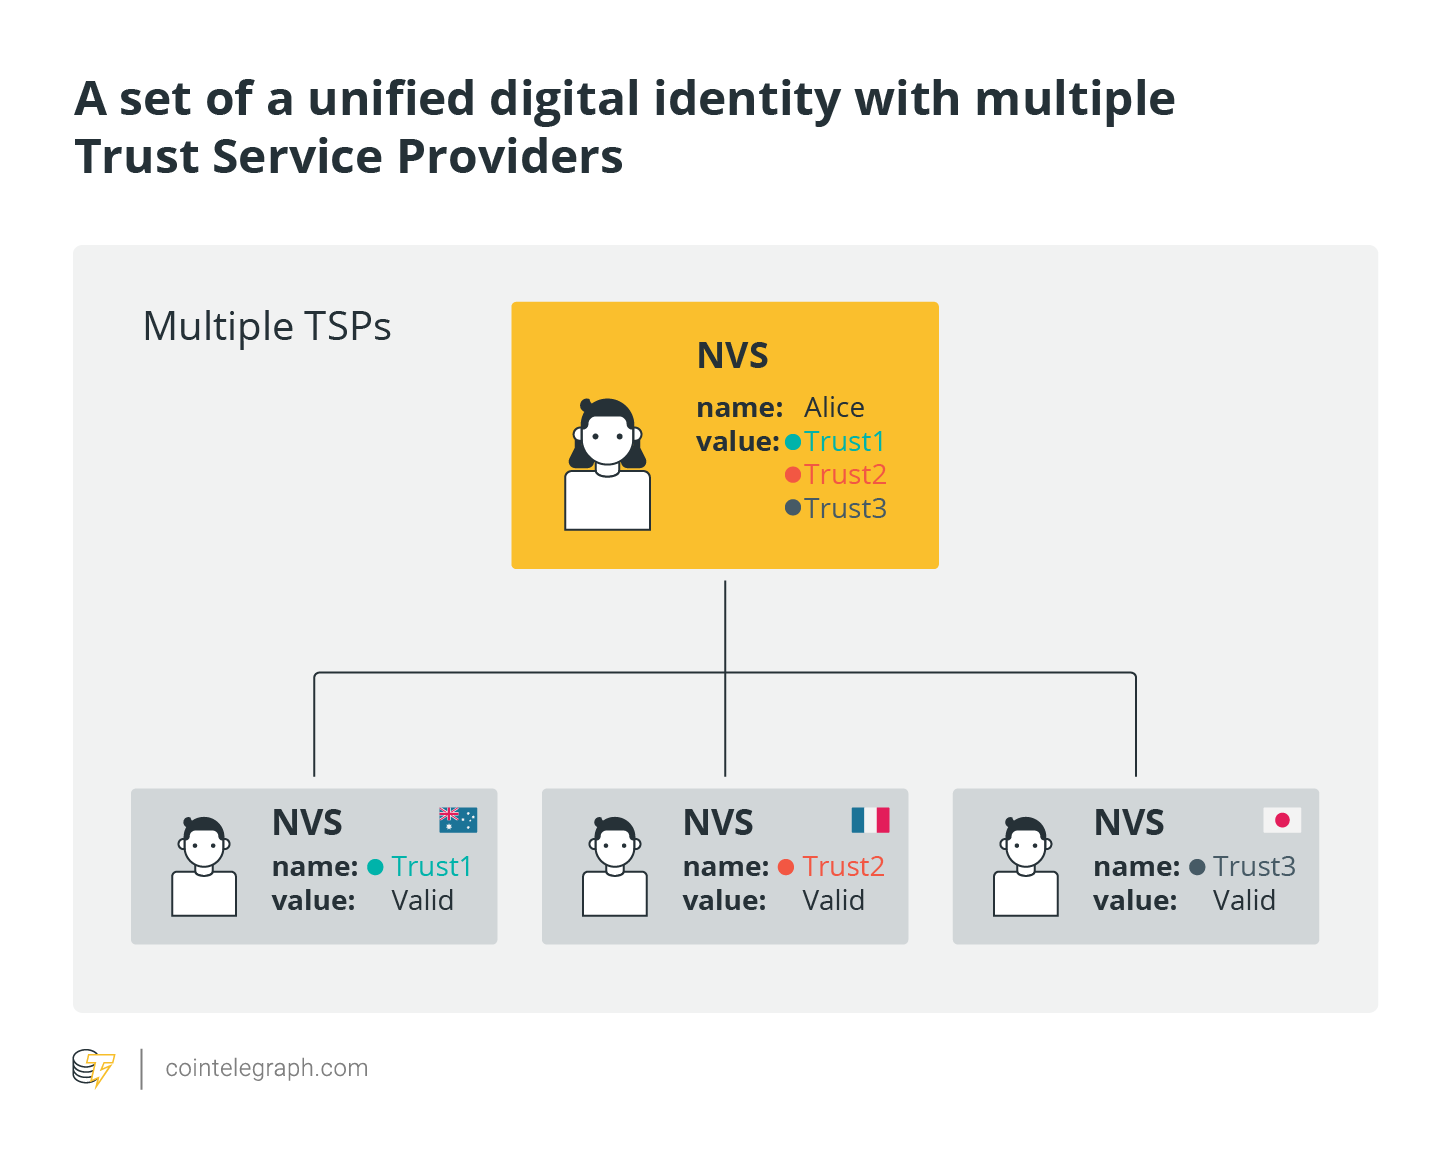 A set of unified digital identity with multiple Trust Service Providers